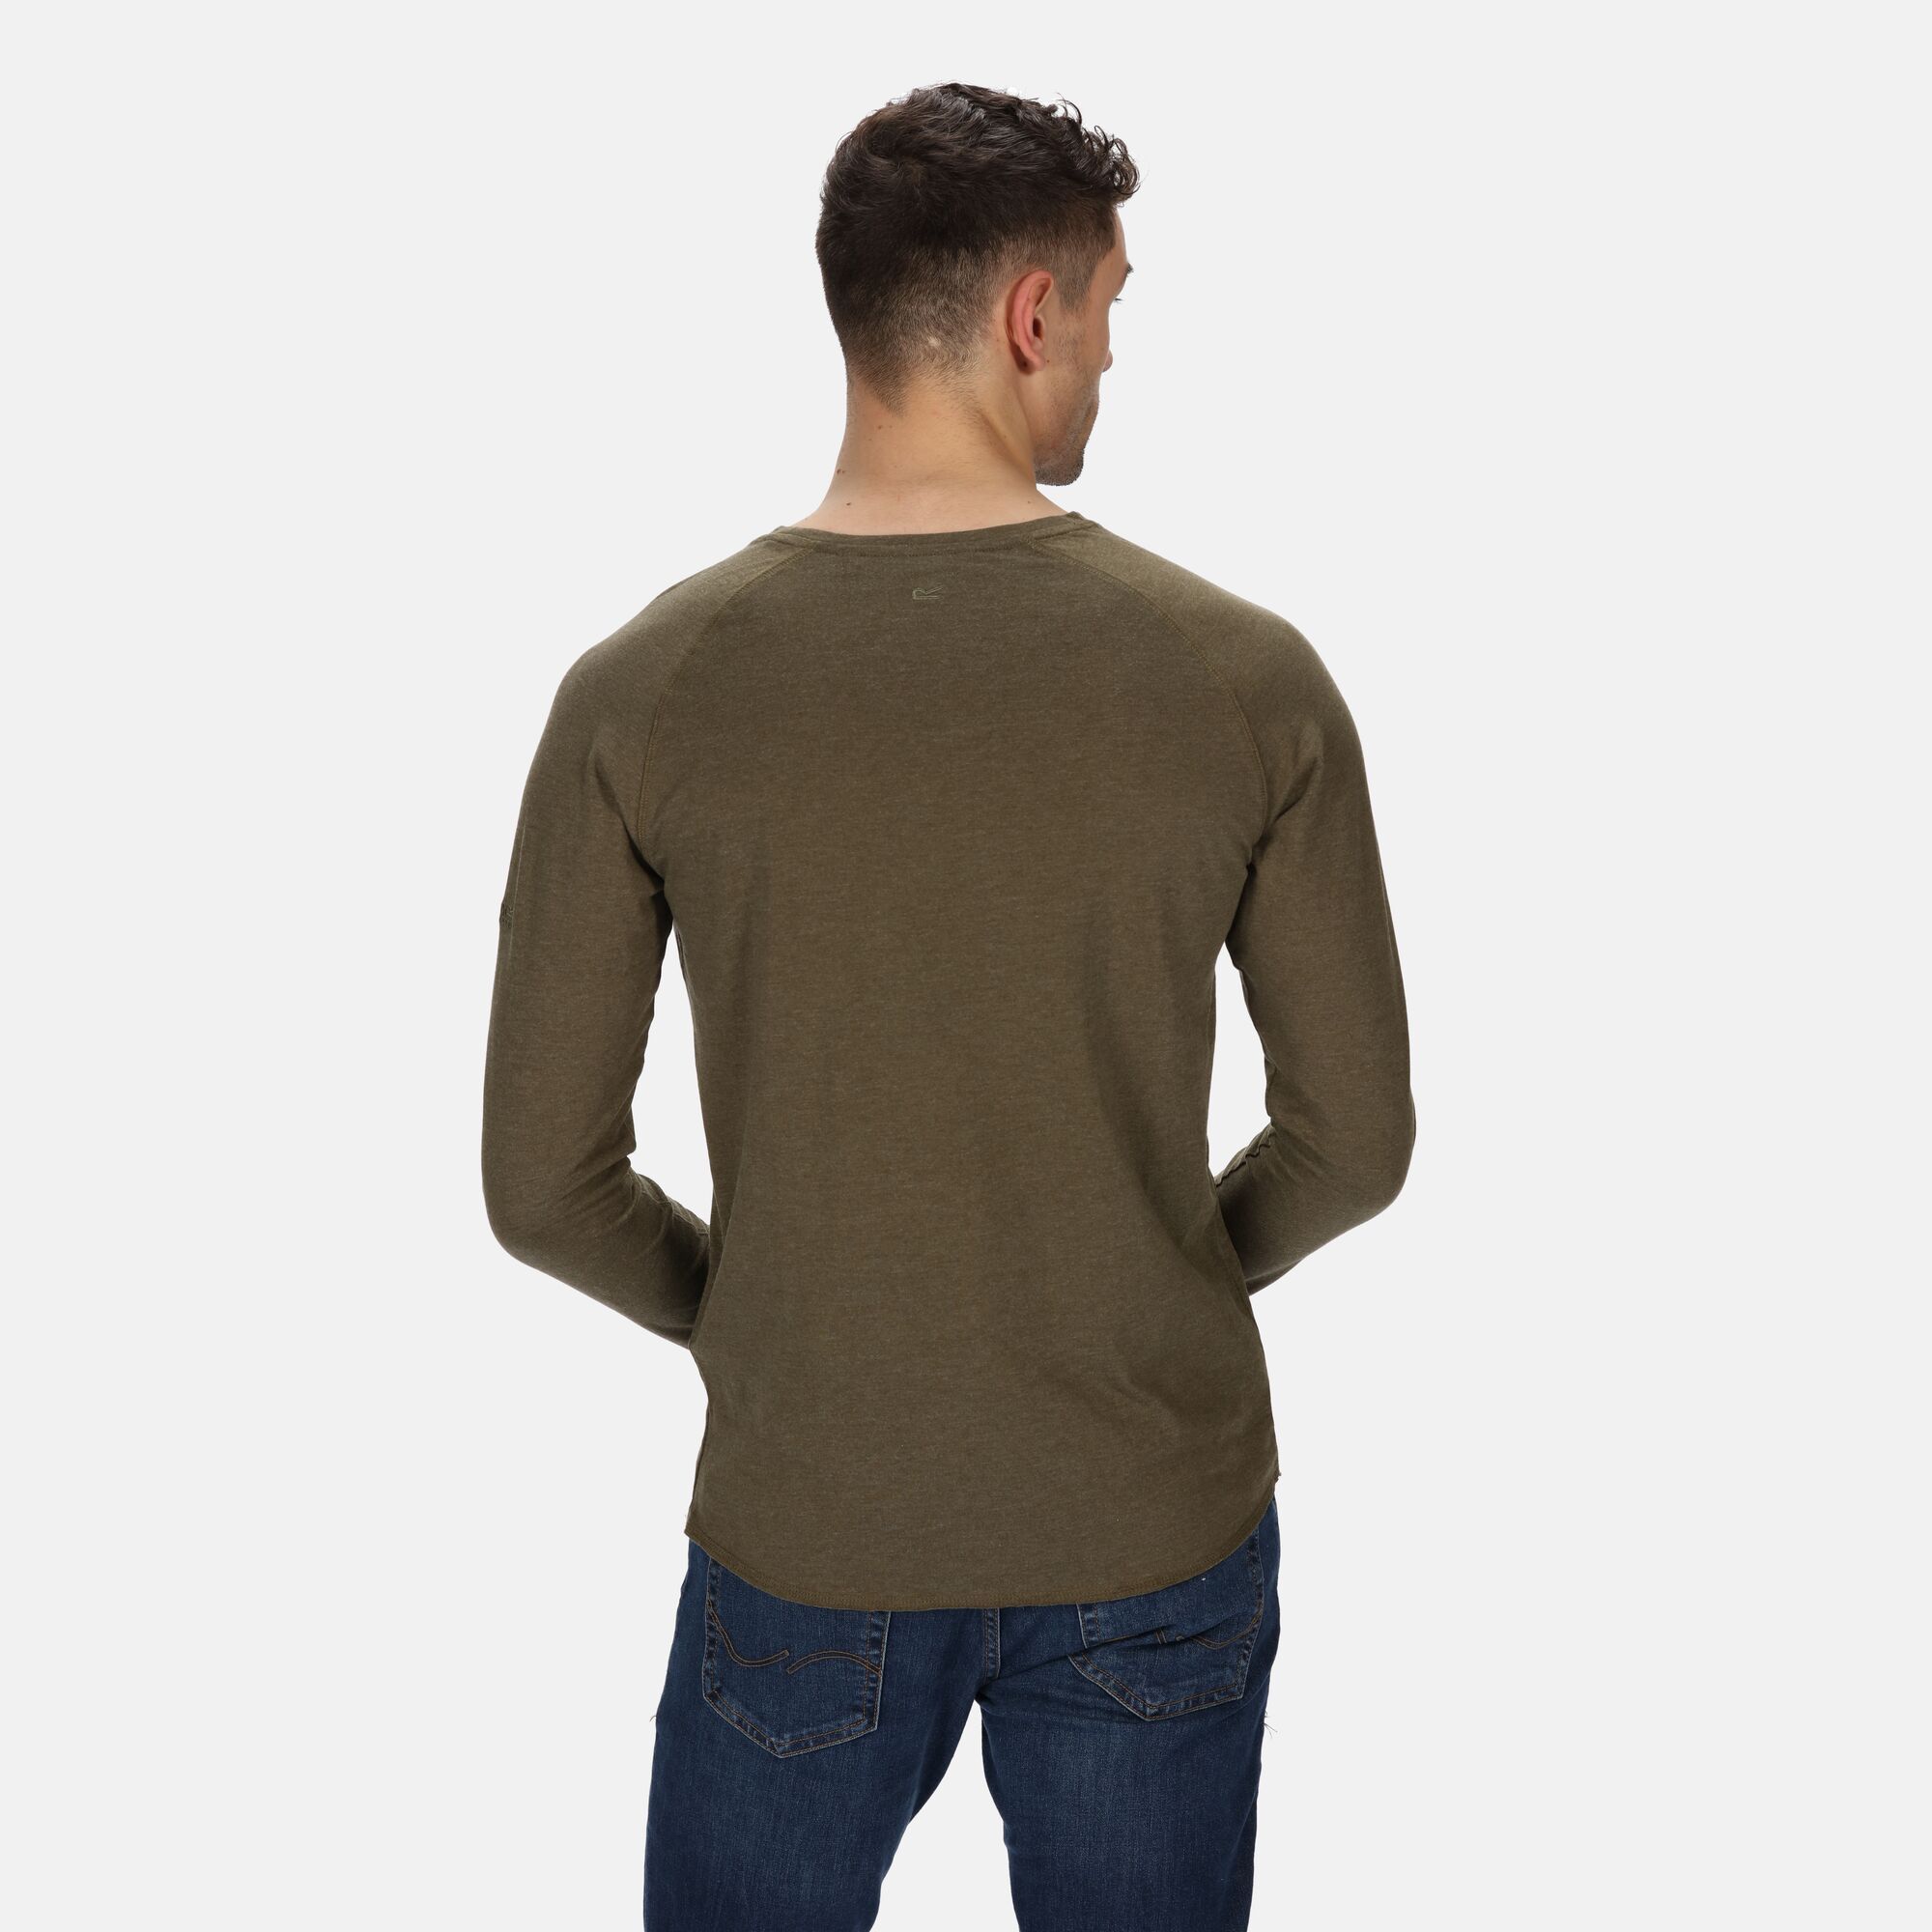 Material: 60% Cotton, 40% Polyester. Long sleeved sweatshirt with v-neckline. Made from 160gsm Coolweave organic cotton/polyester single jersey fabric. Garment enzyme washed for softer handle.